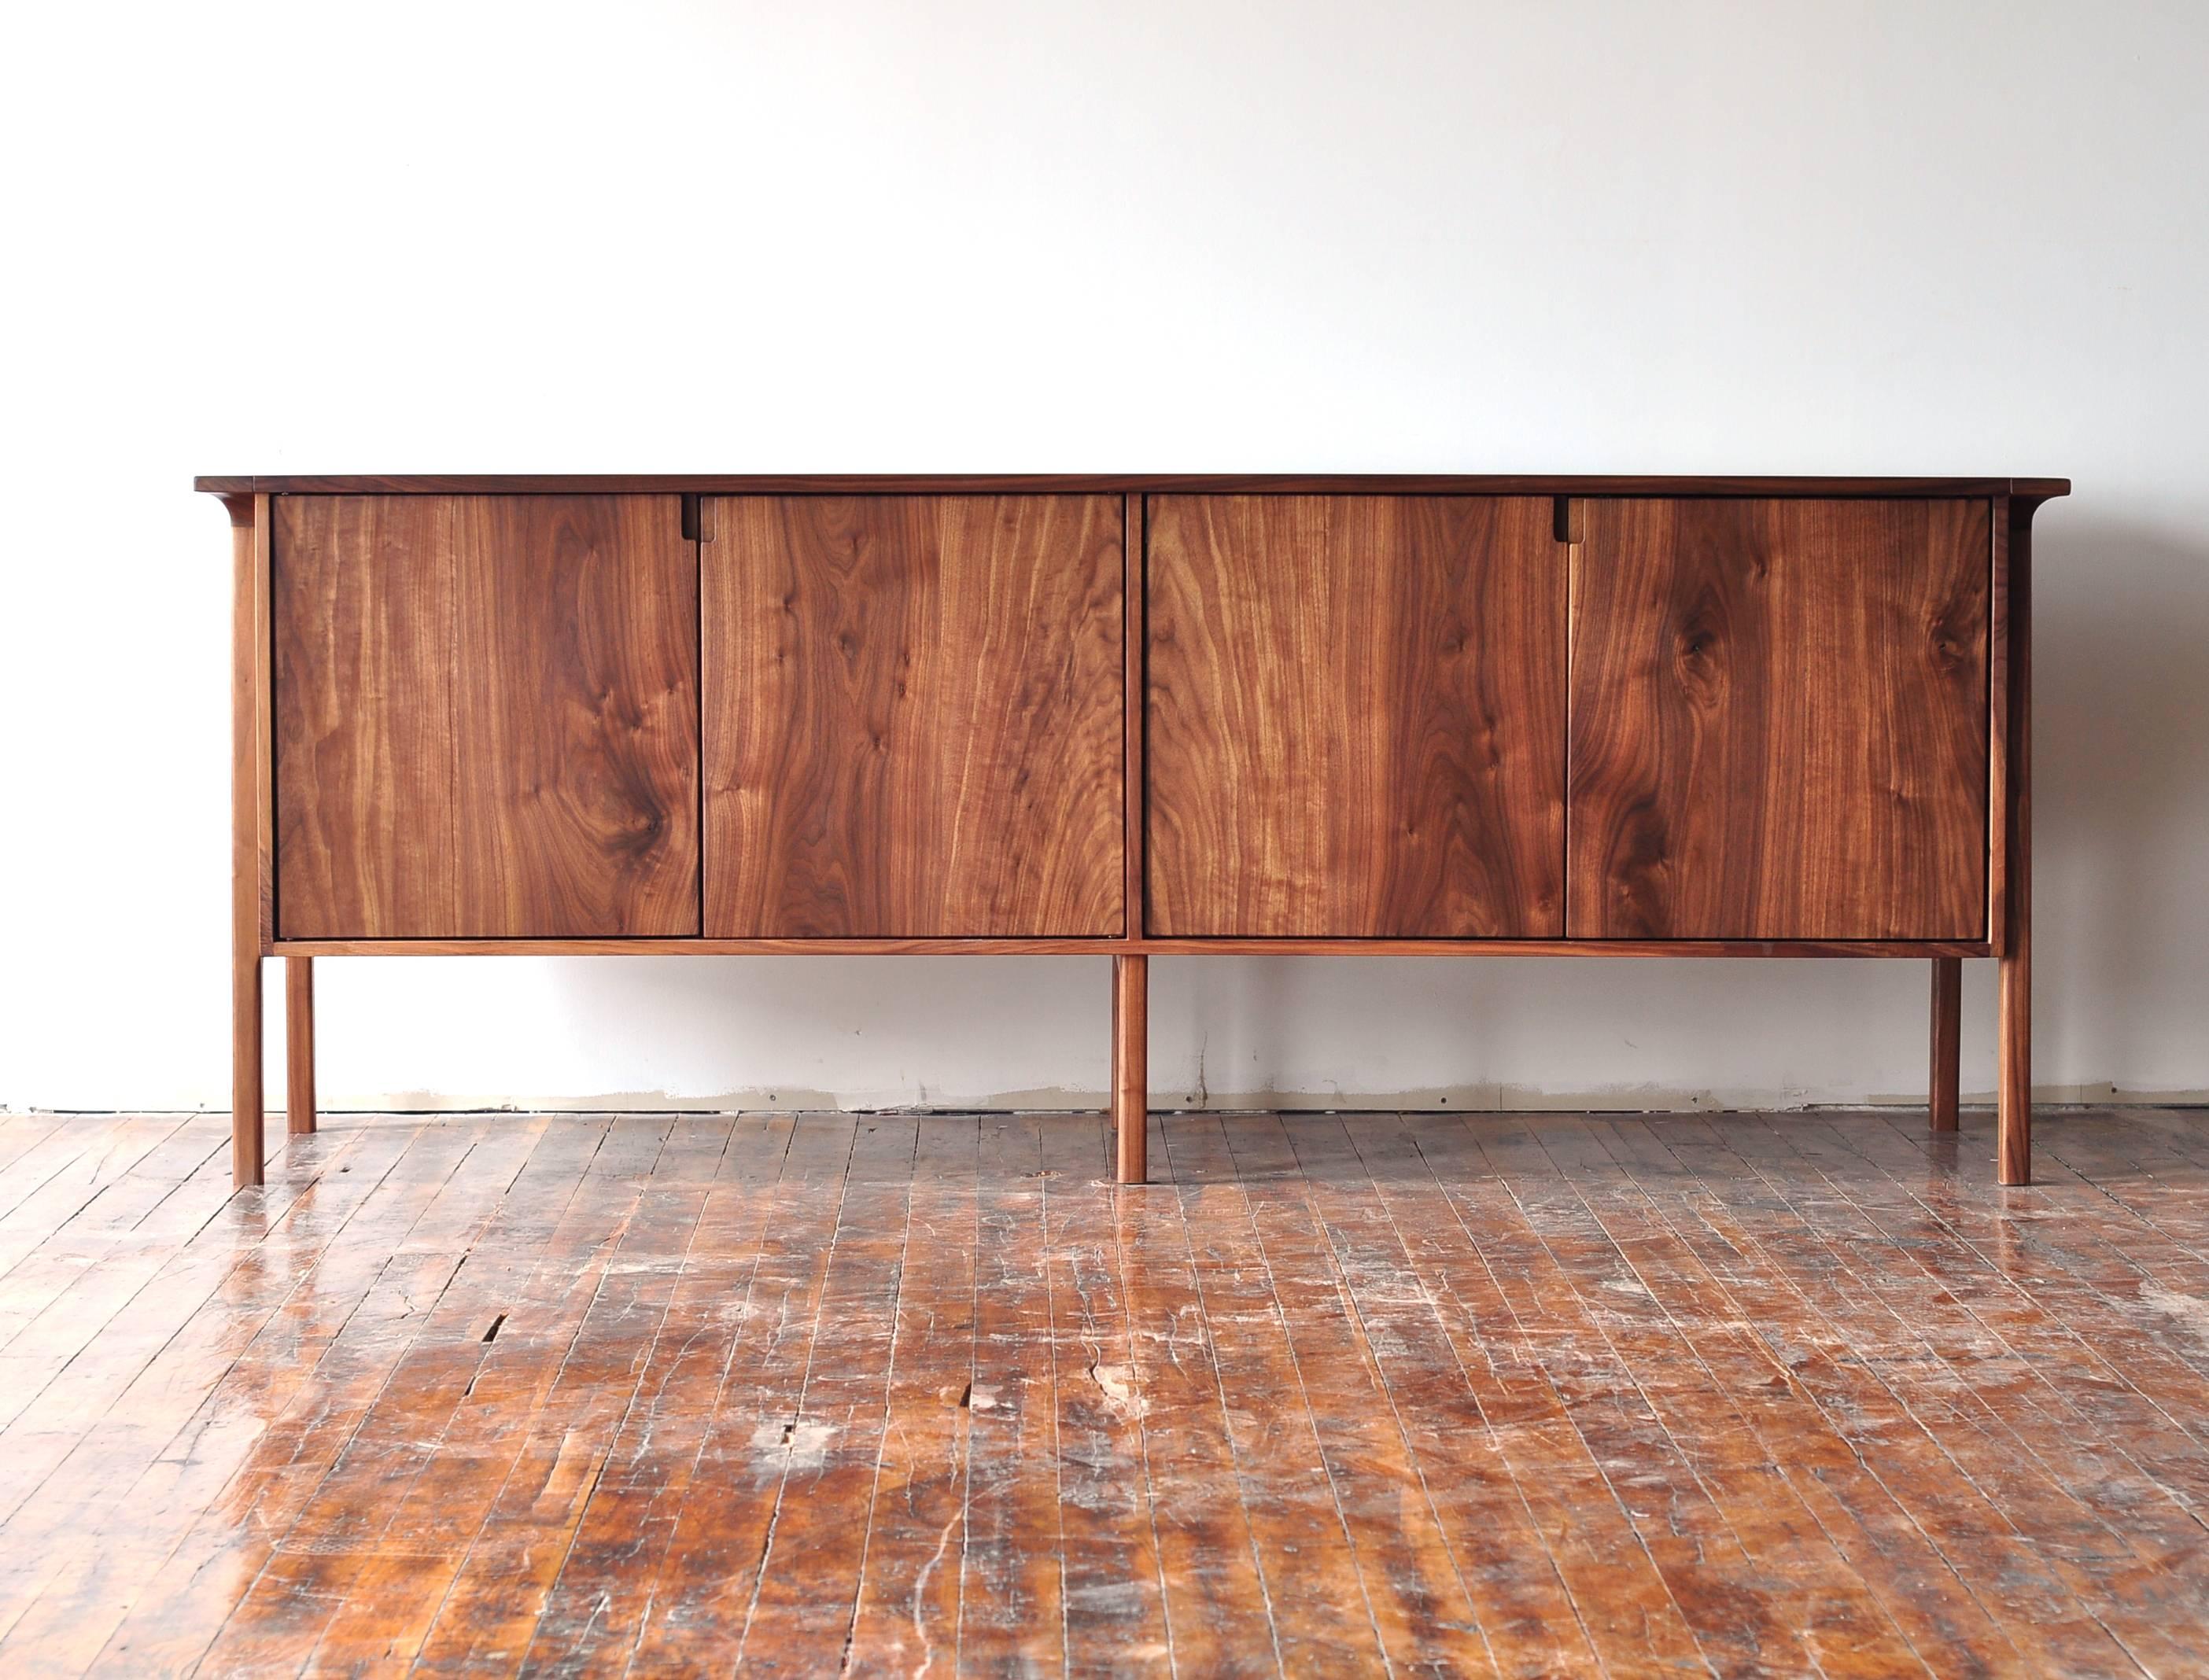 The ST01 is a long storage piece of solid walnut and could be used as a sideboard, credenza, or media cabinet. It features outer legs that extend up the sides of the case and are sculpted into the overhanging top. The simple solid wood doors and